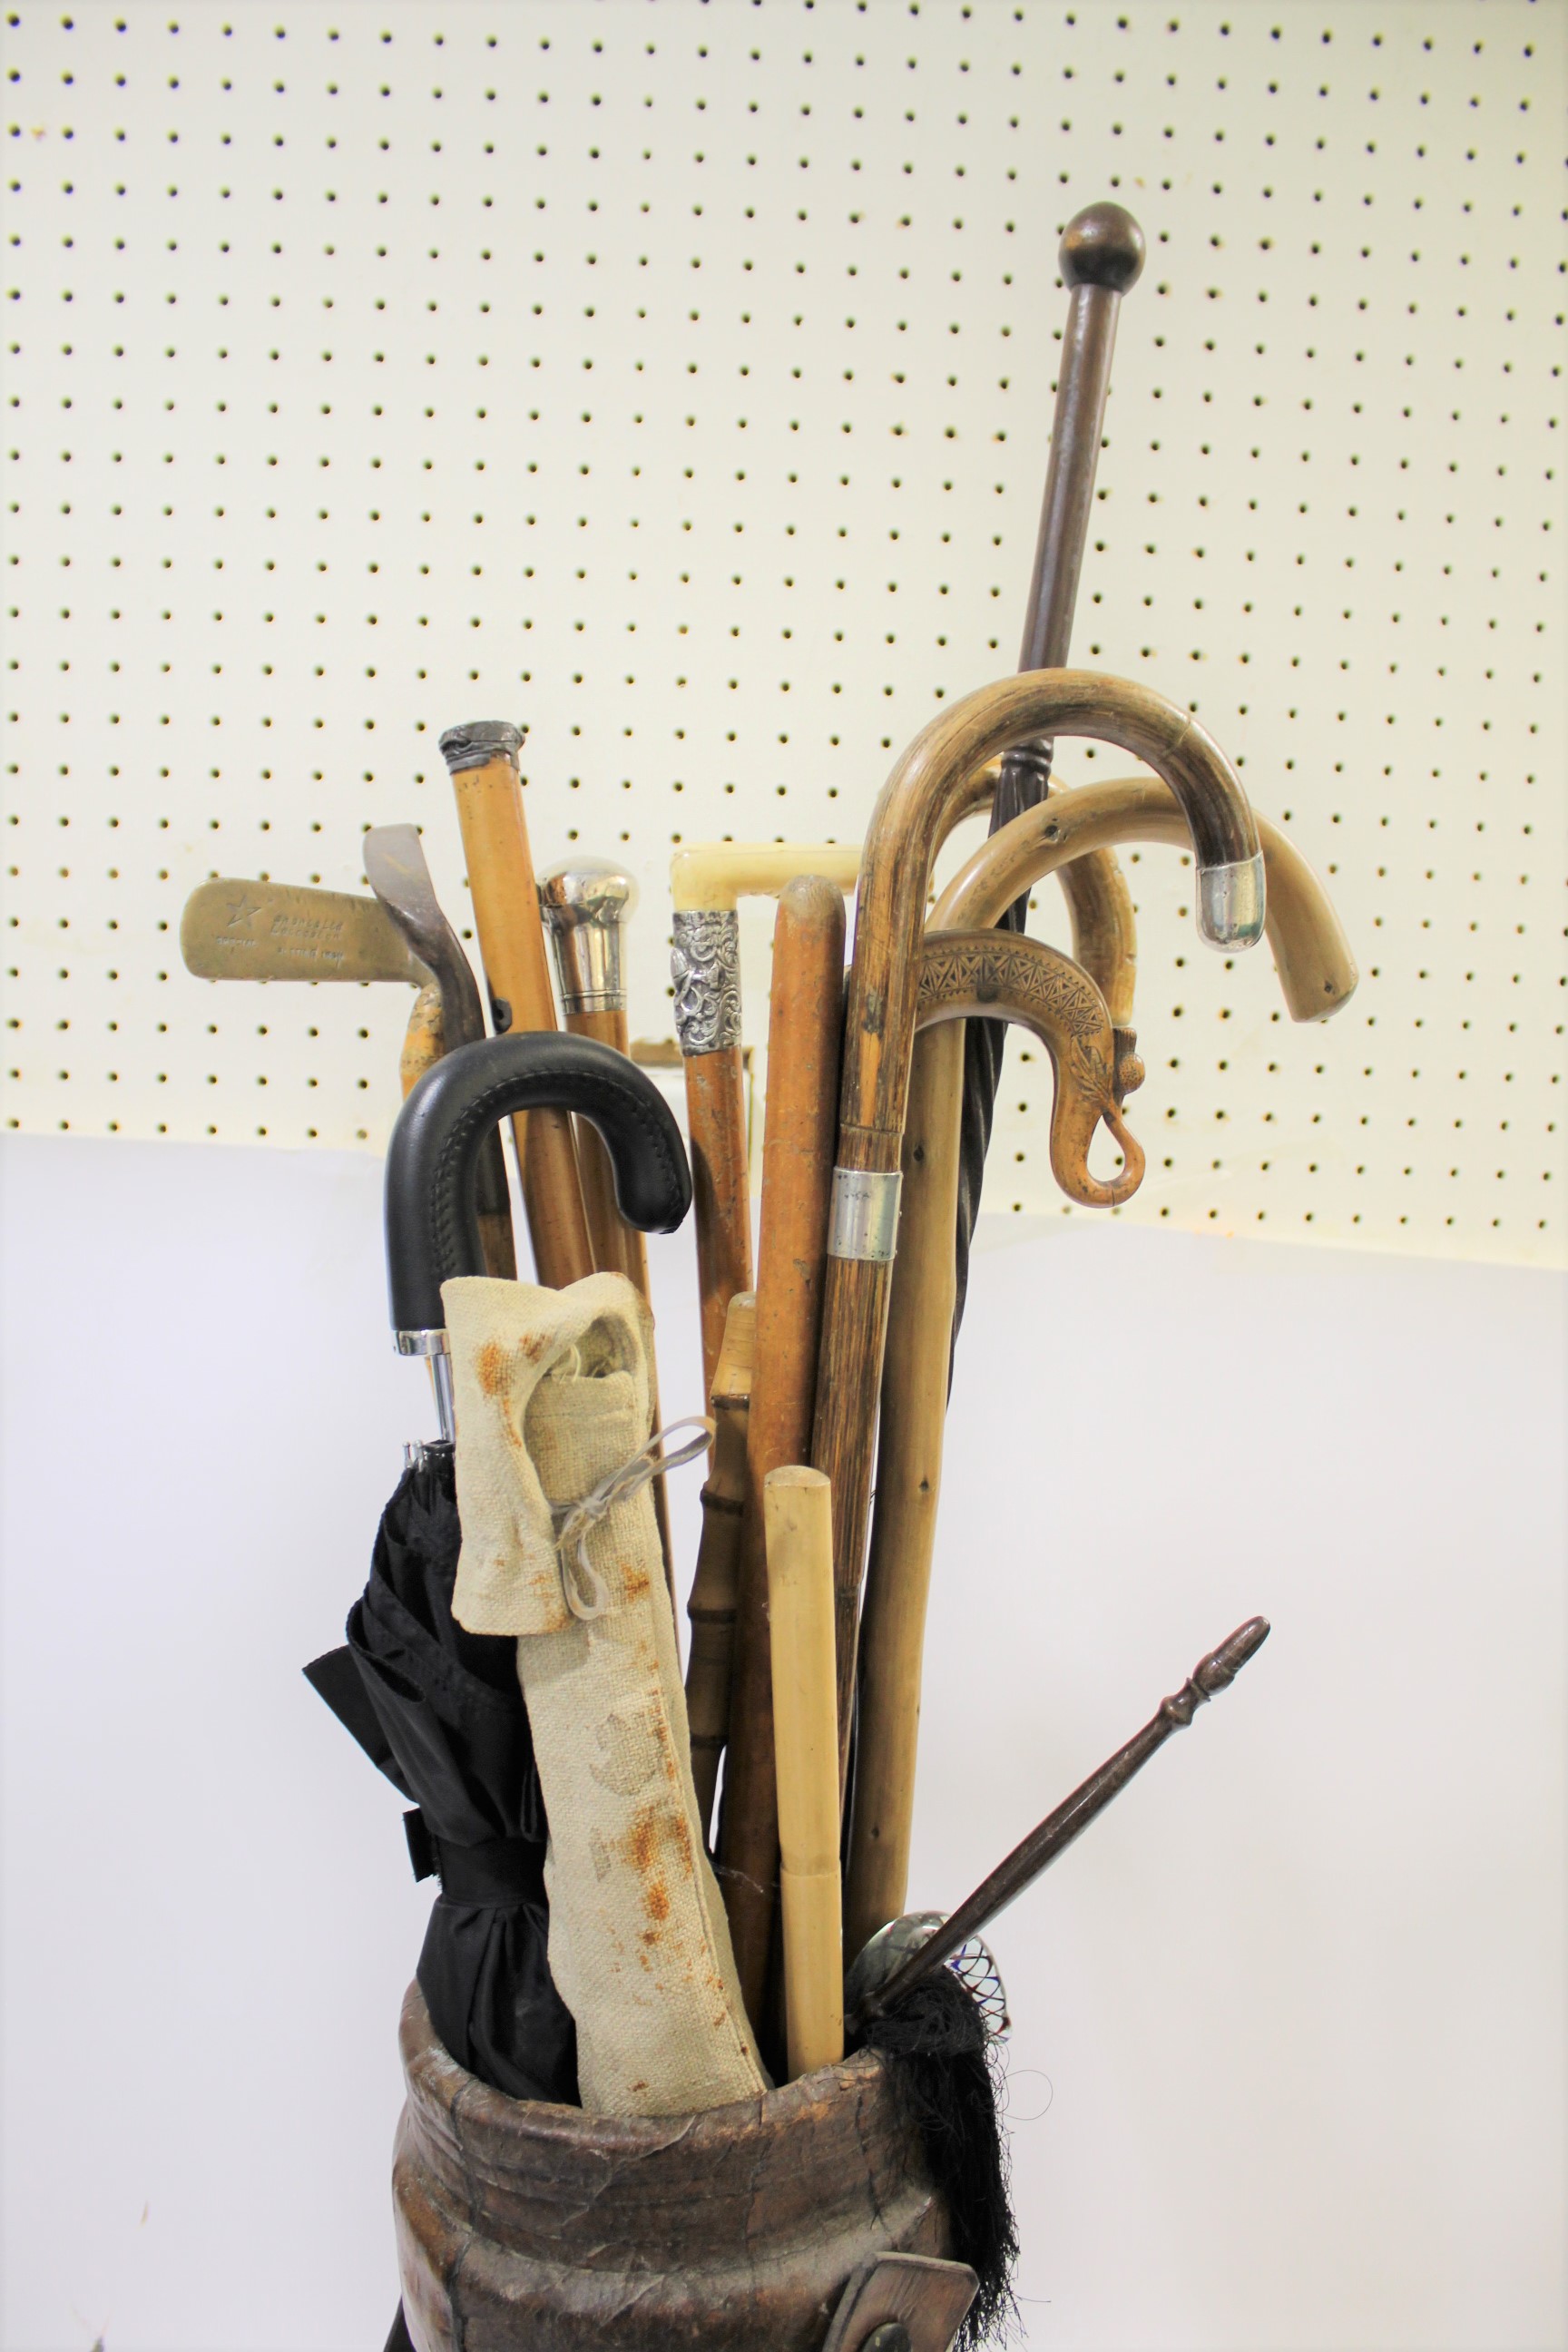 LEATHER STICK STAND - WALKING STICKS & UMBRELLAS a leather stick stand (cannon ball holder) with a - Image 2 of 7